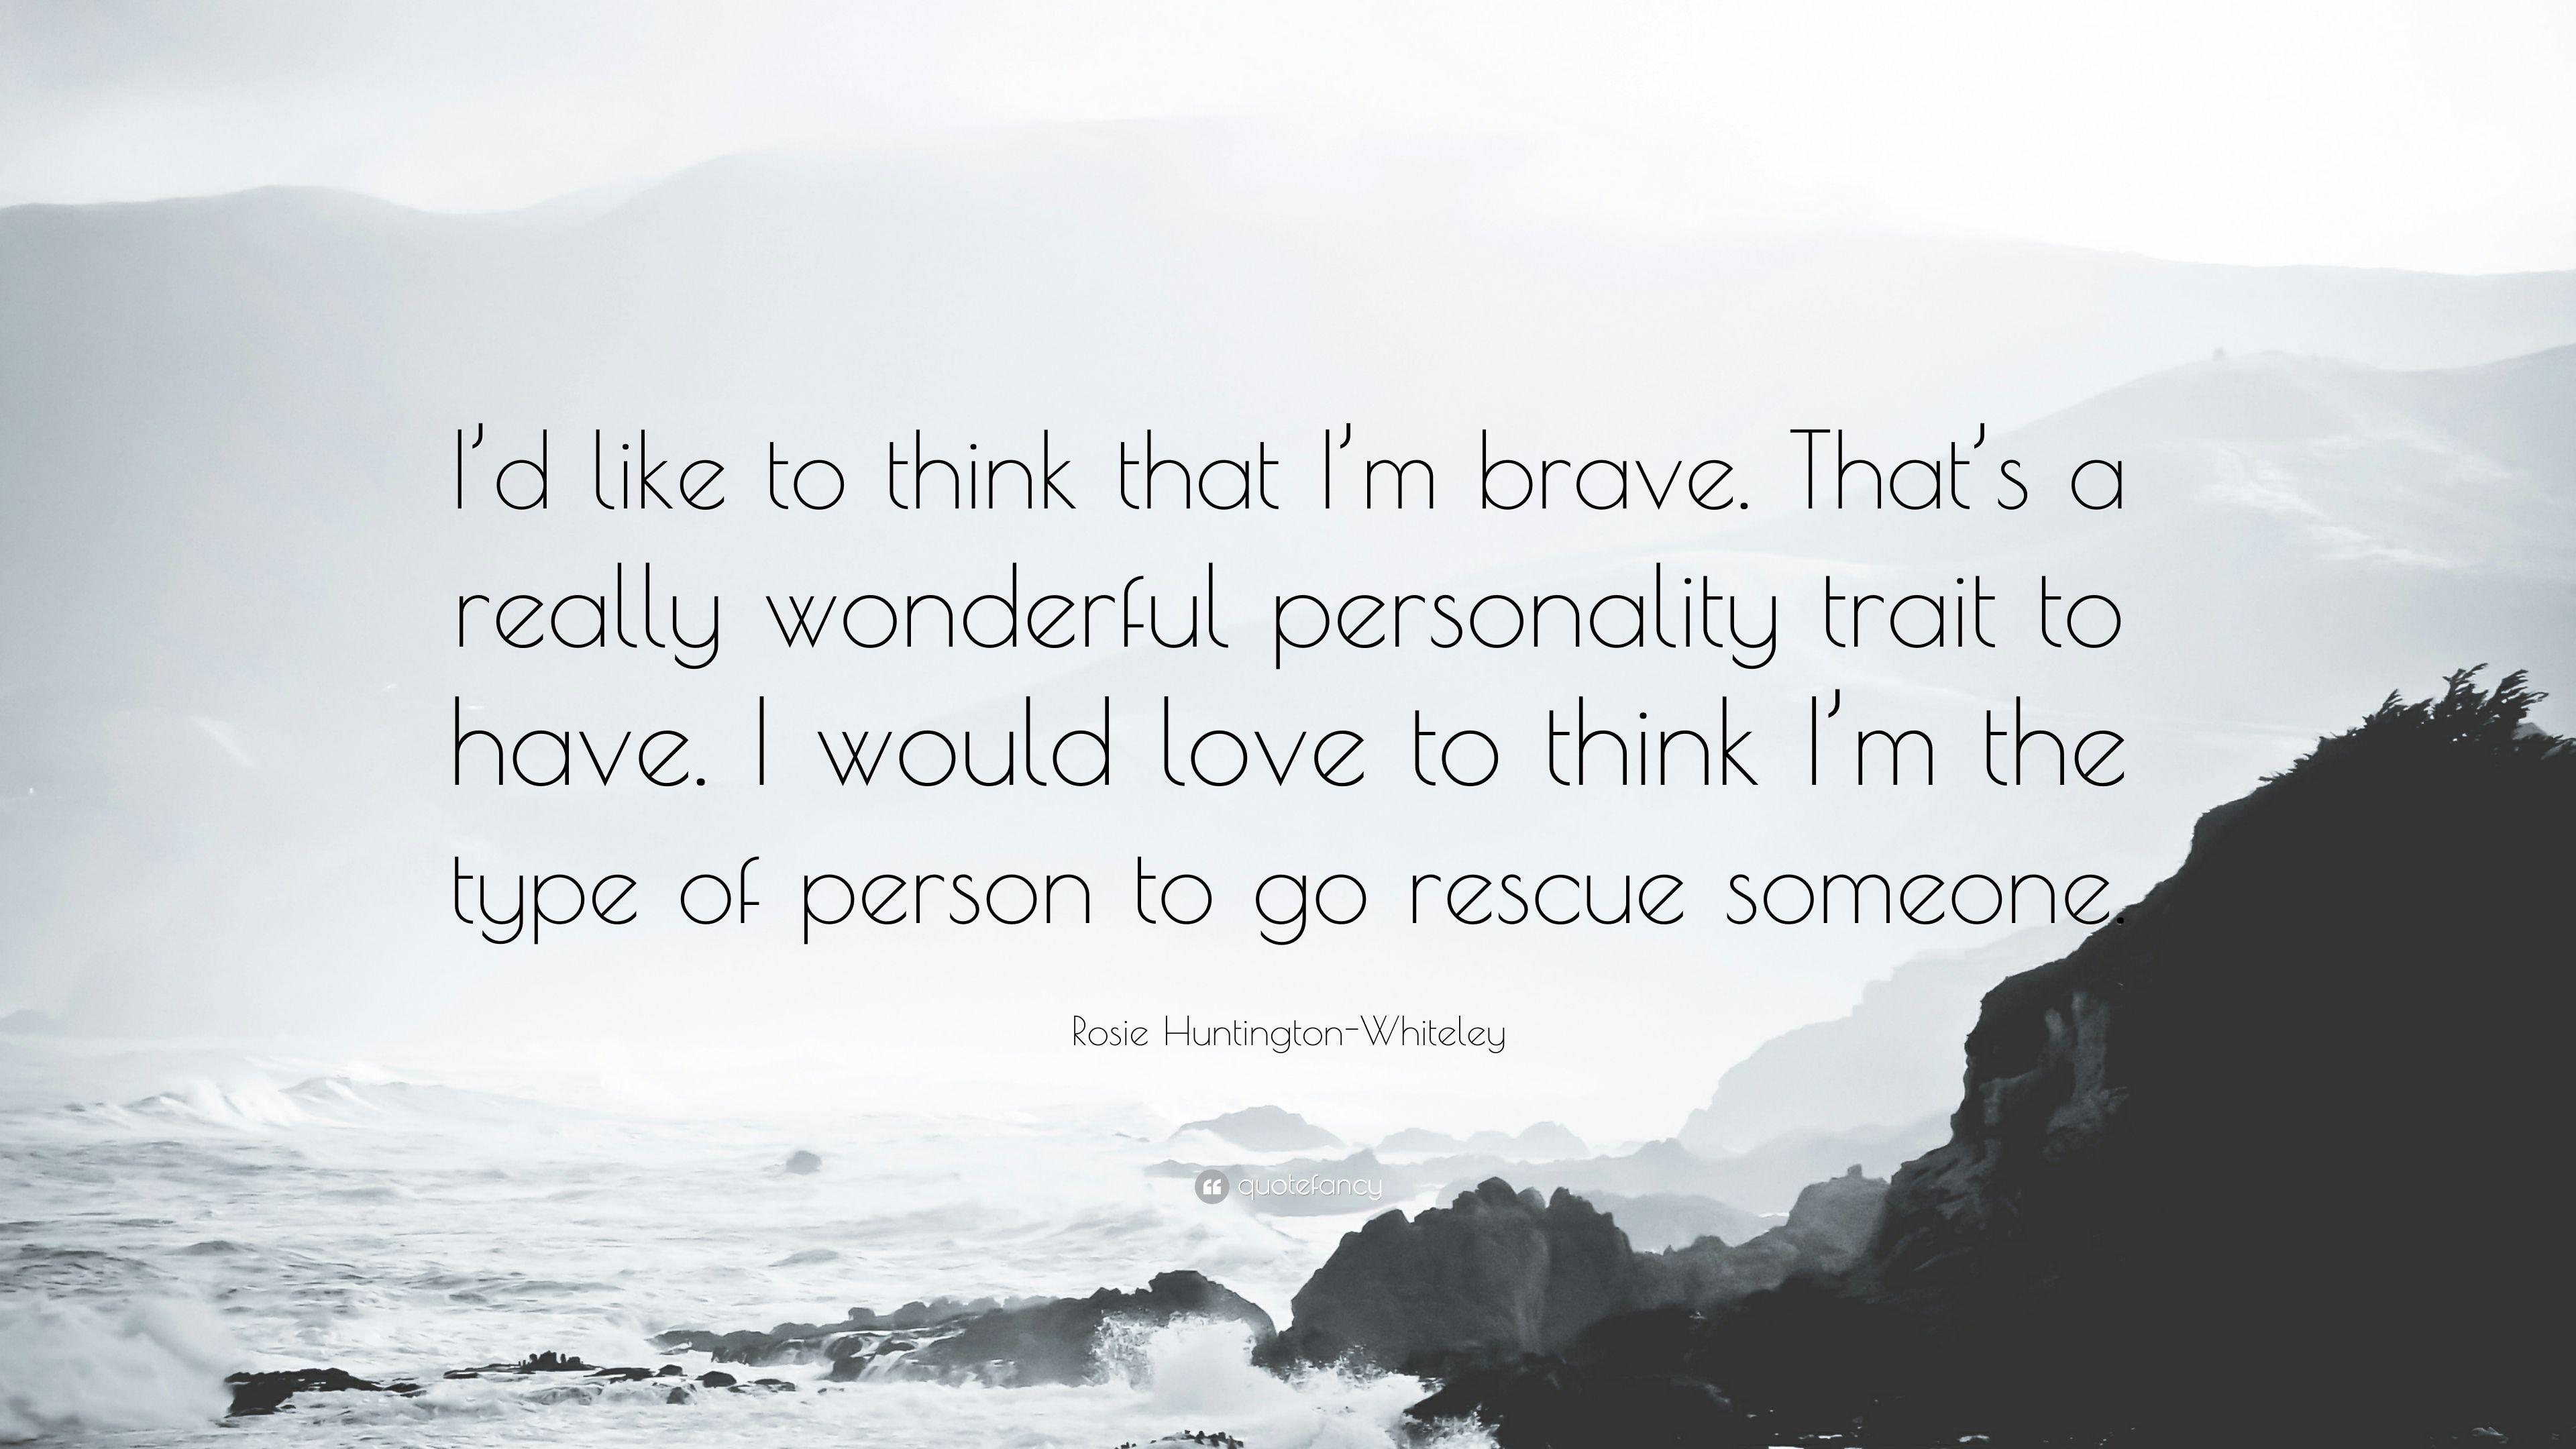 Rosie Huntington Whiteley Quote: “I'd Like To Think That I'm Brave